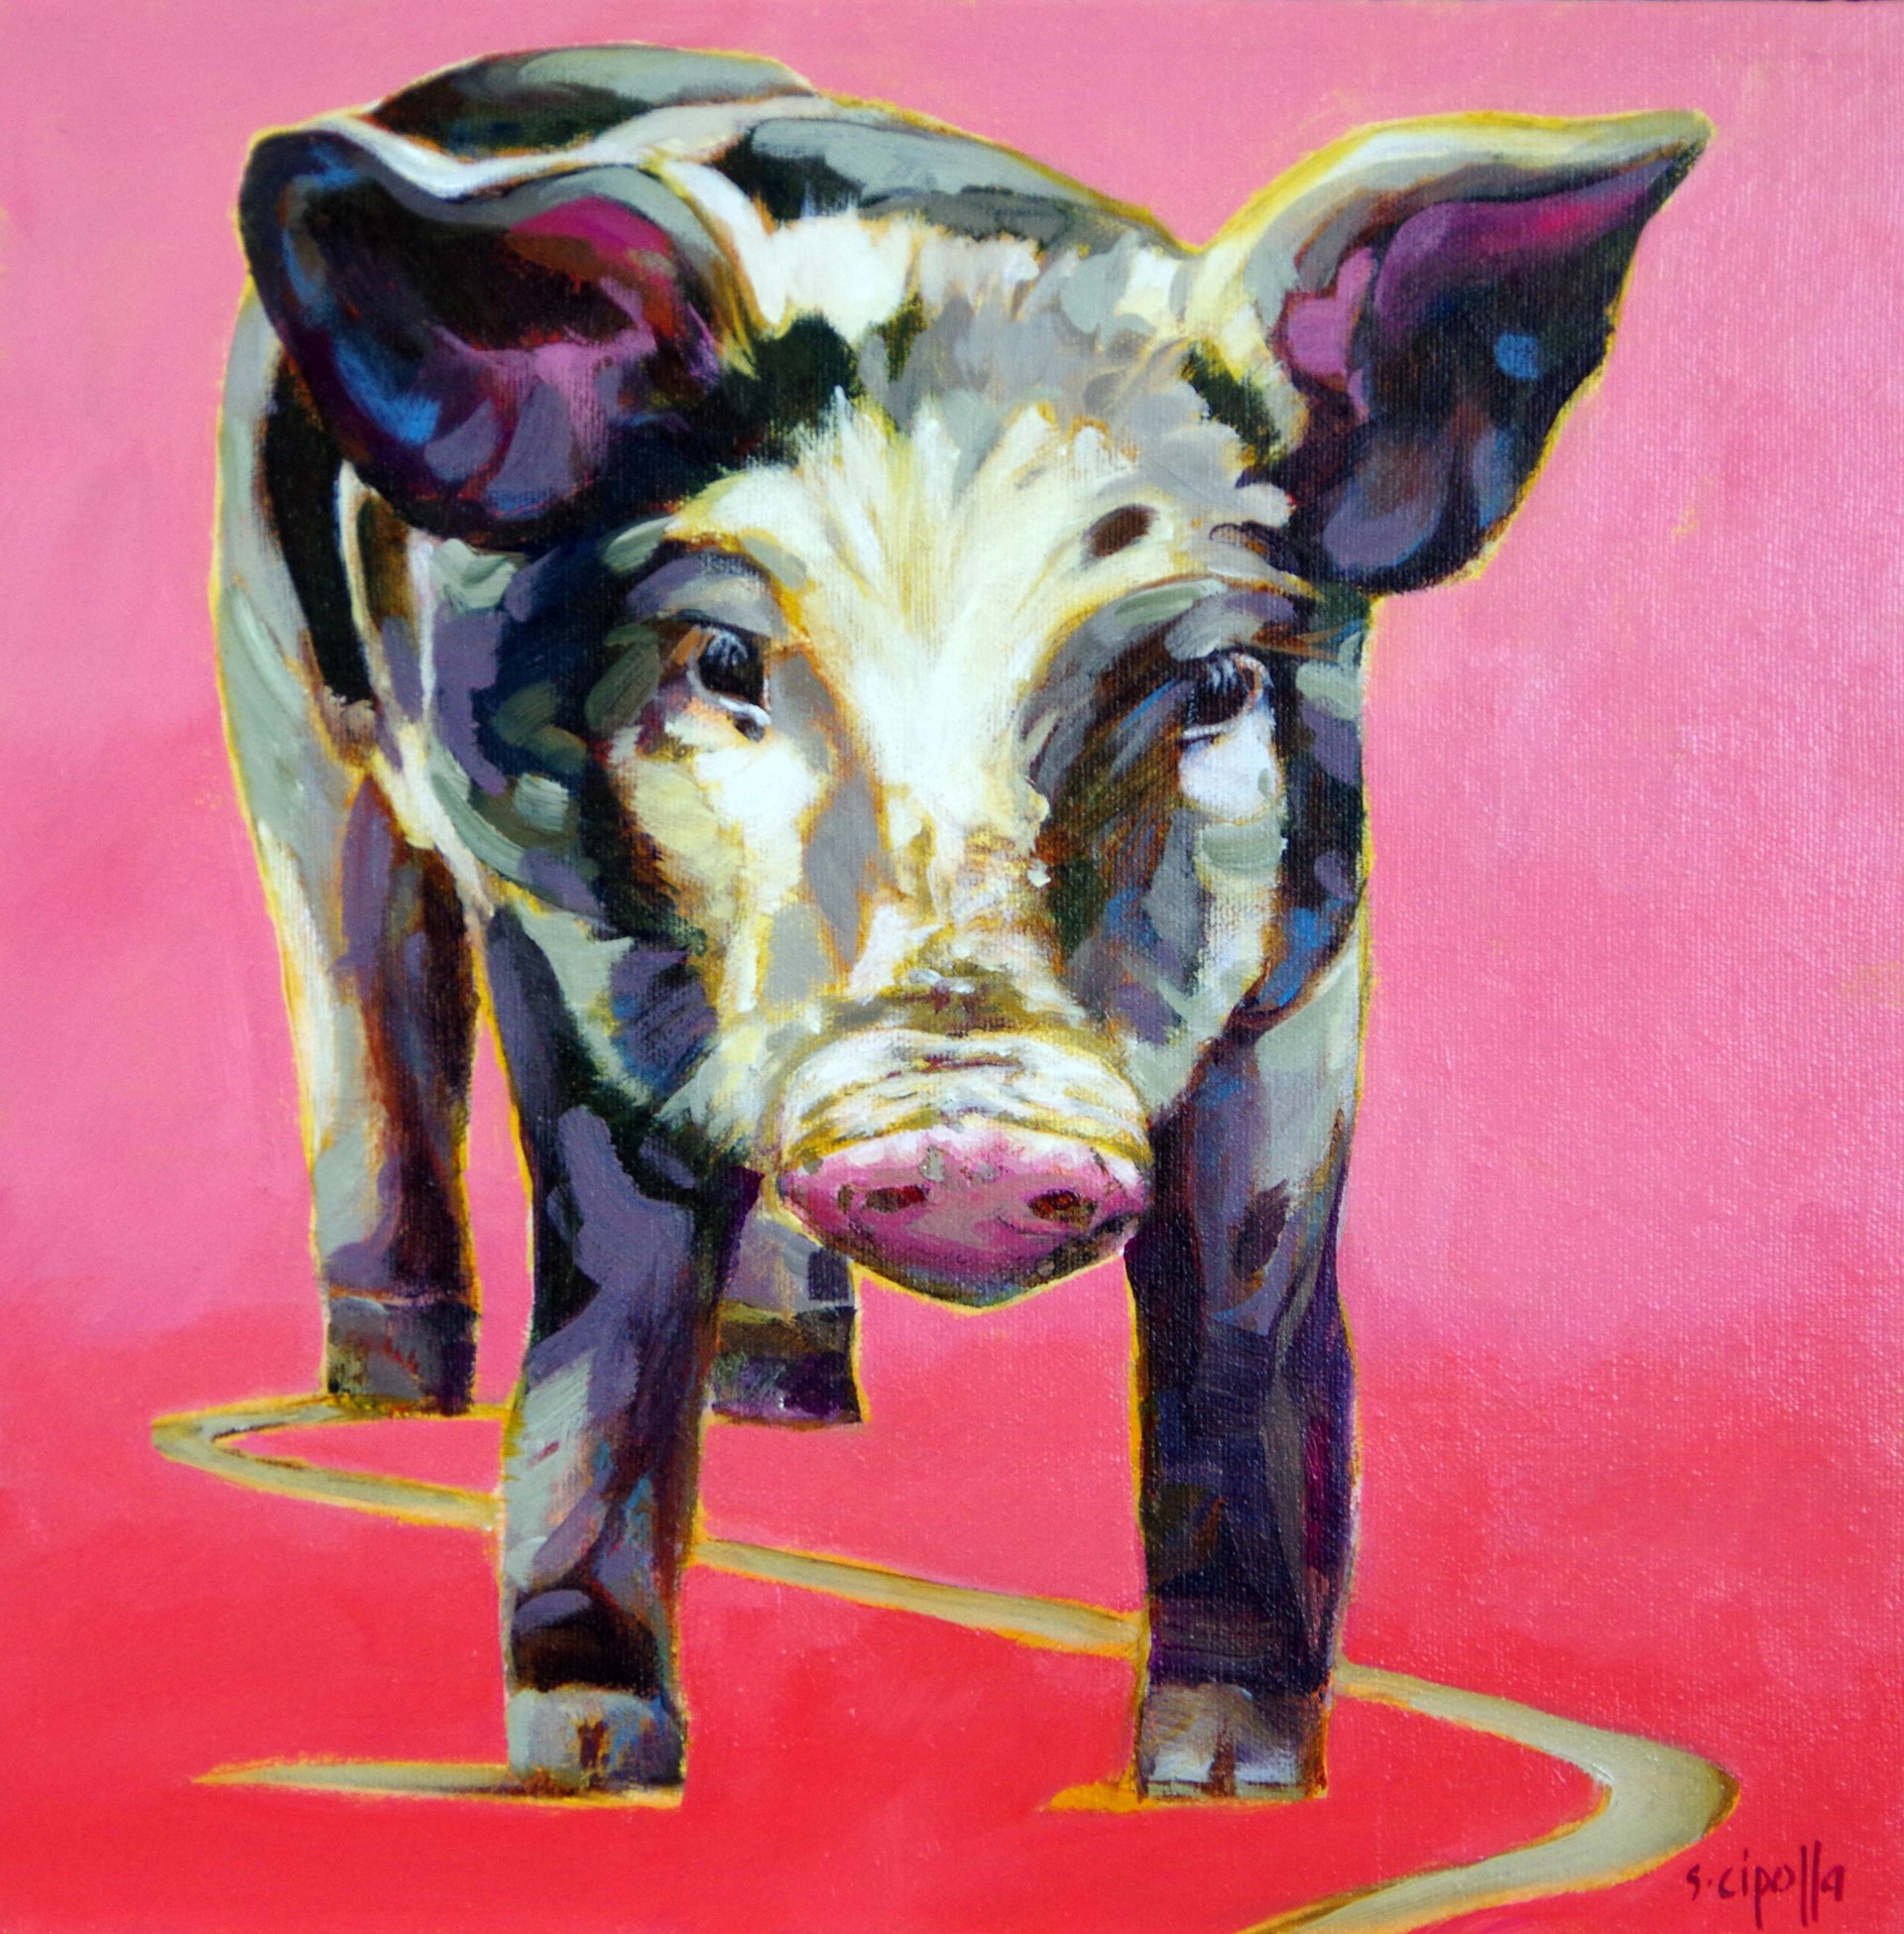 This Little Pig by SUSIE CIPOLLA